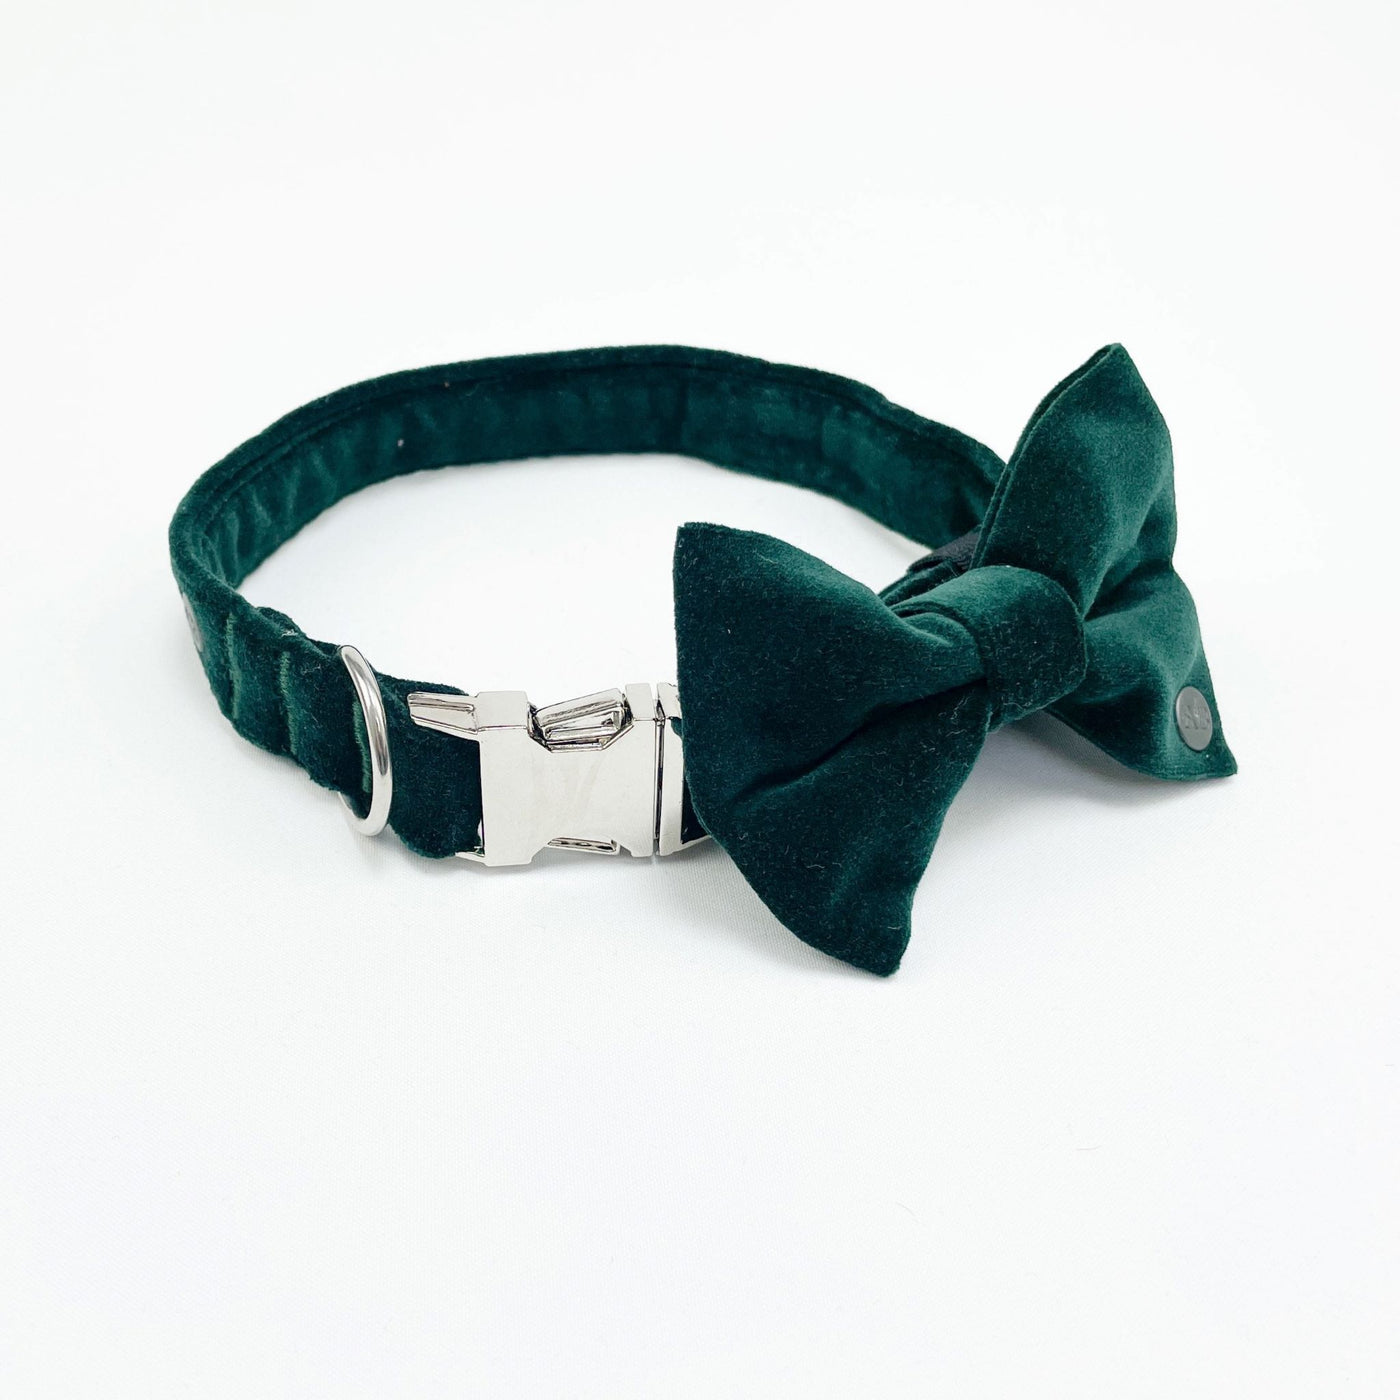 Luxury Emerald Green Velvet Dog Collar with matching bow tie.